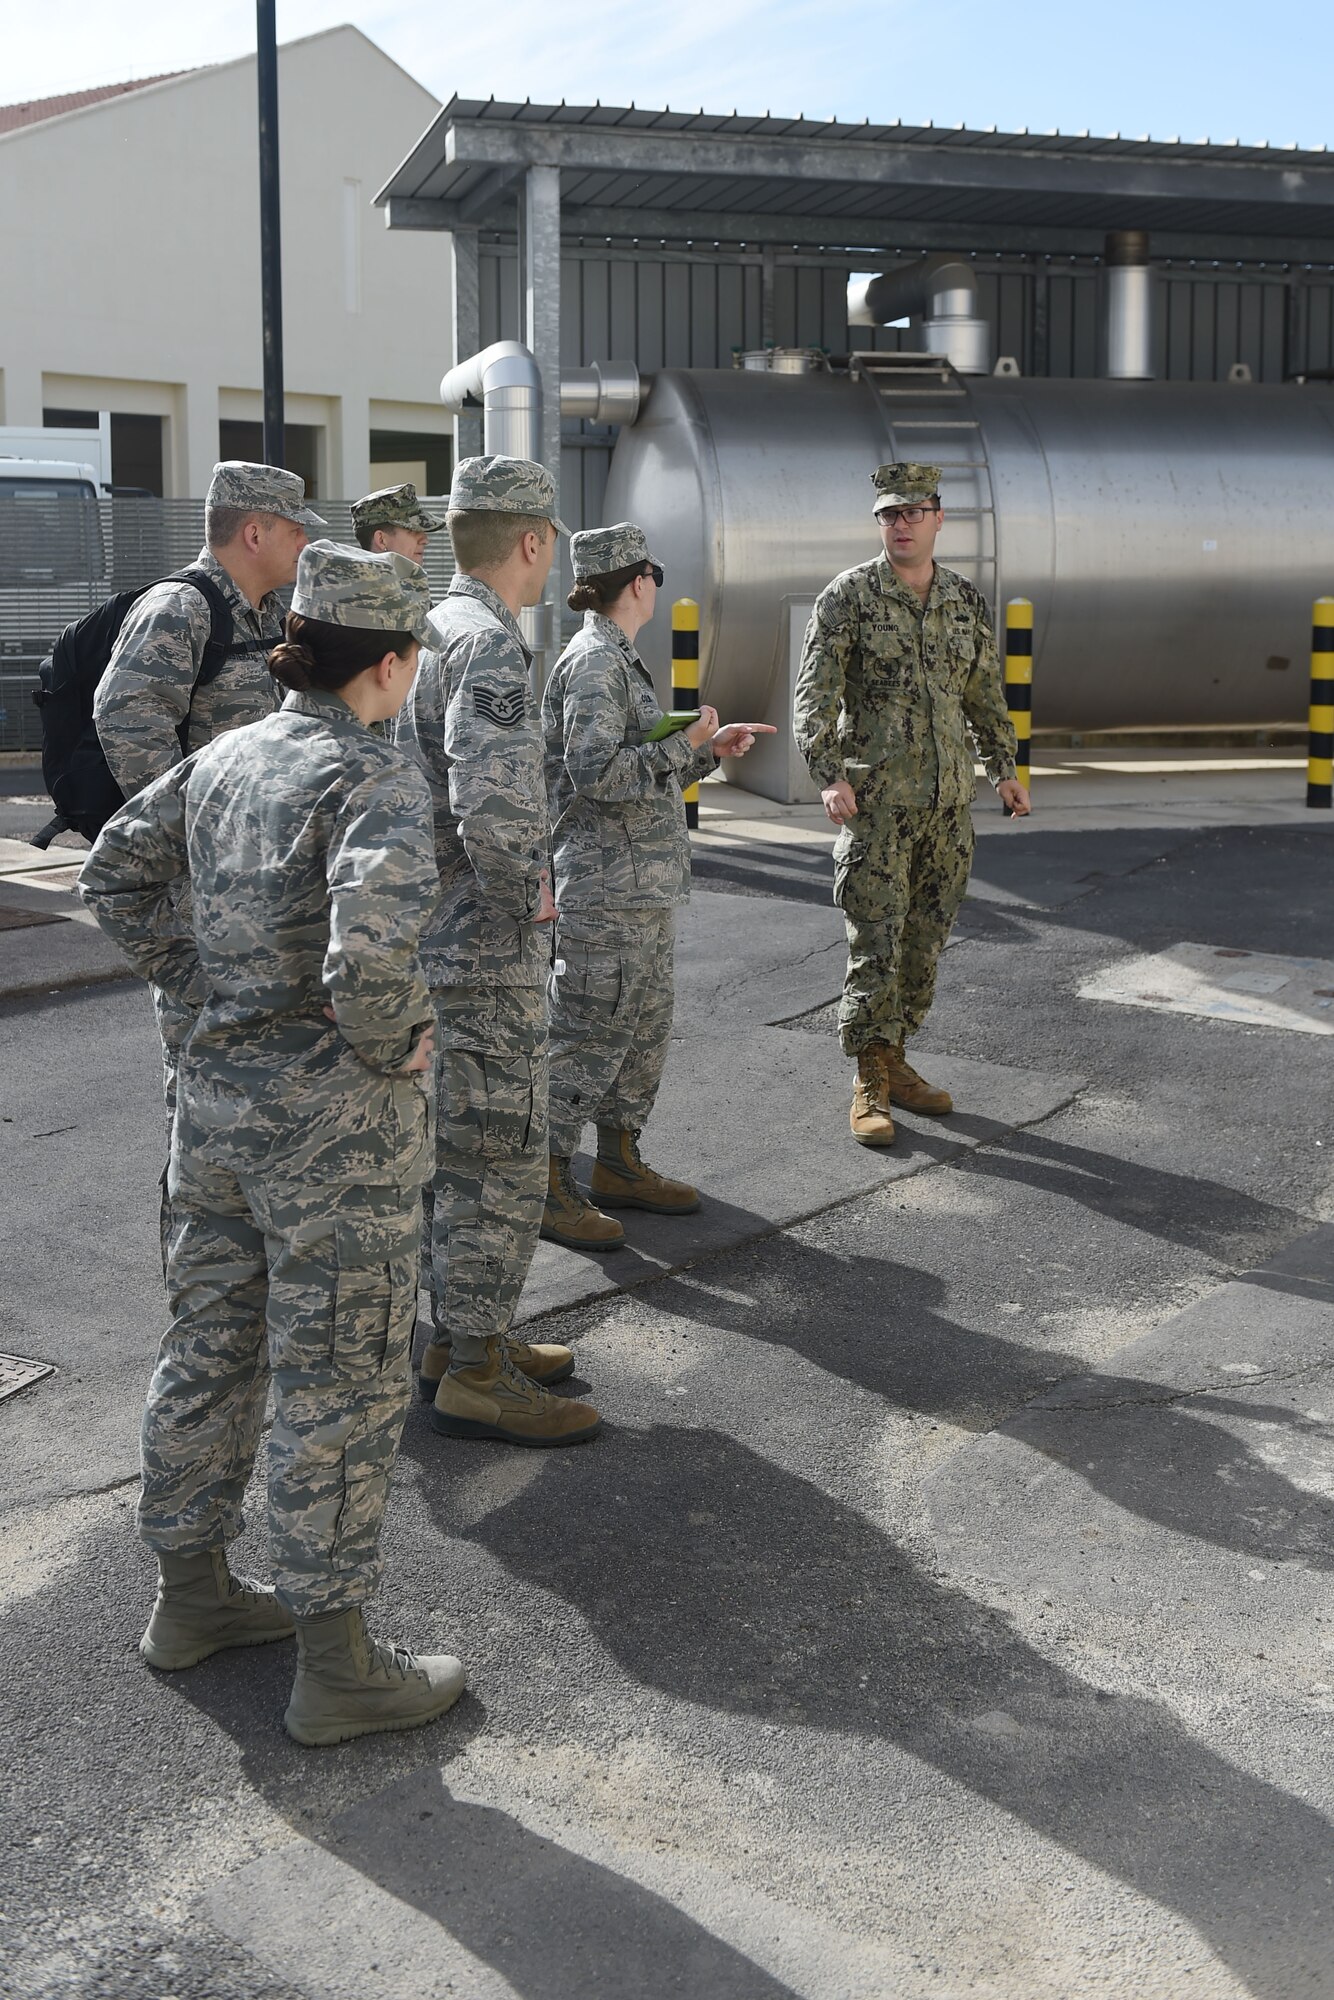 The Bio Environmental Engineering (BEE) take a tour of the water treatment plant at Naval Air Station I (NAS) Sigonella on May 13, 2019. This tour helped the BE understand the processes that are taken to ensure safe drinking water for the entire base. (U.S. Air National Guard photo by Senior Airman Katelyn Sprott)